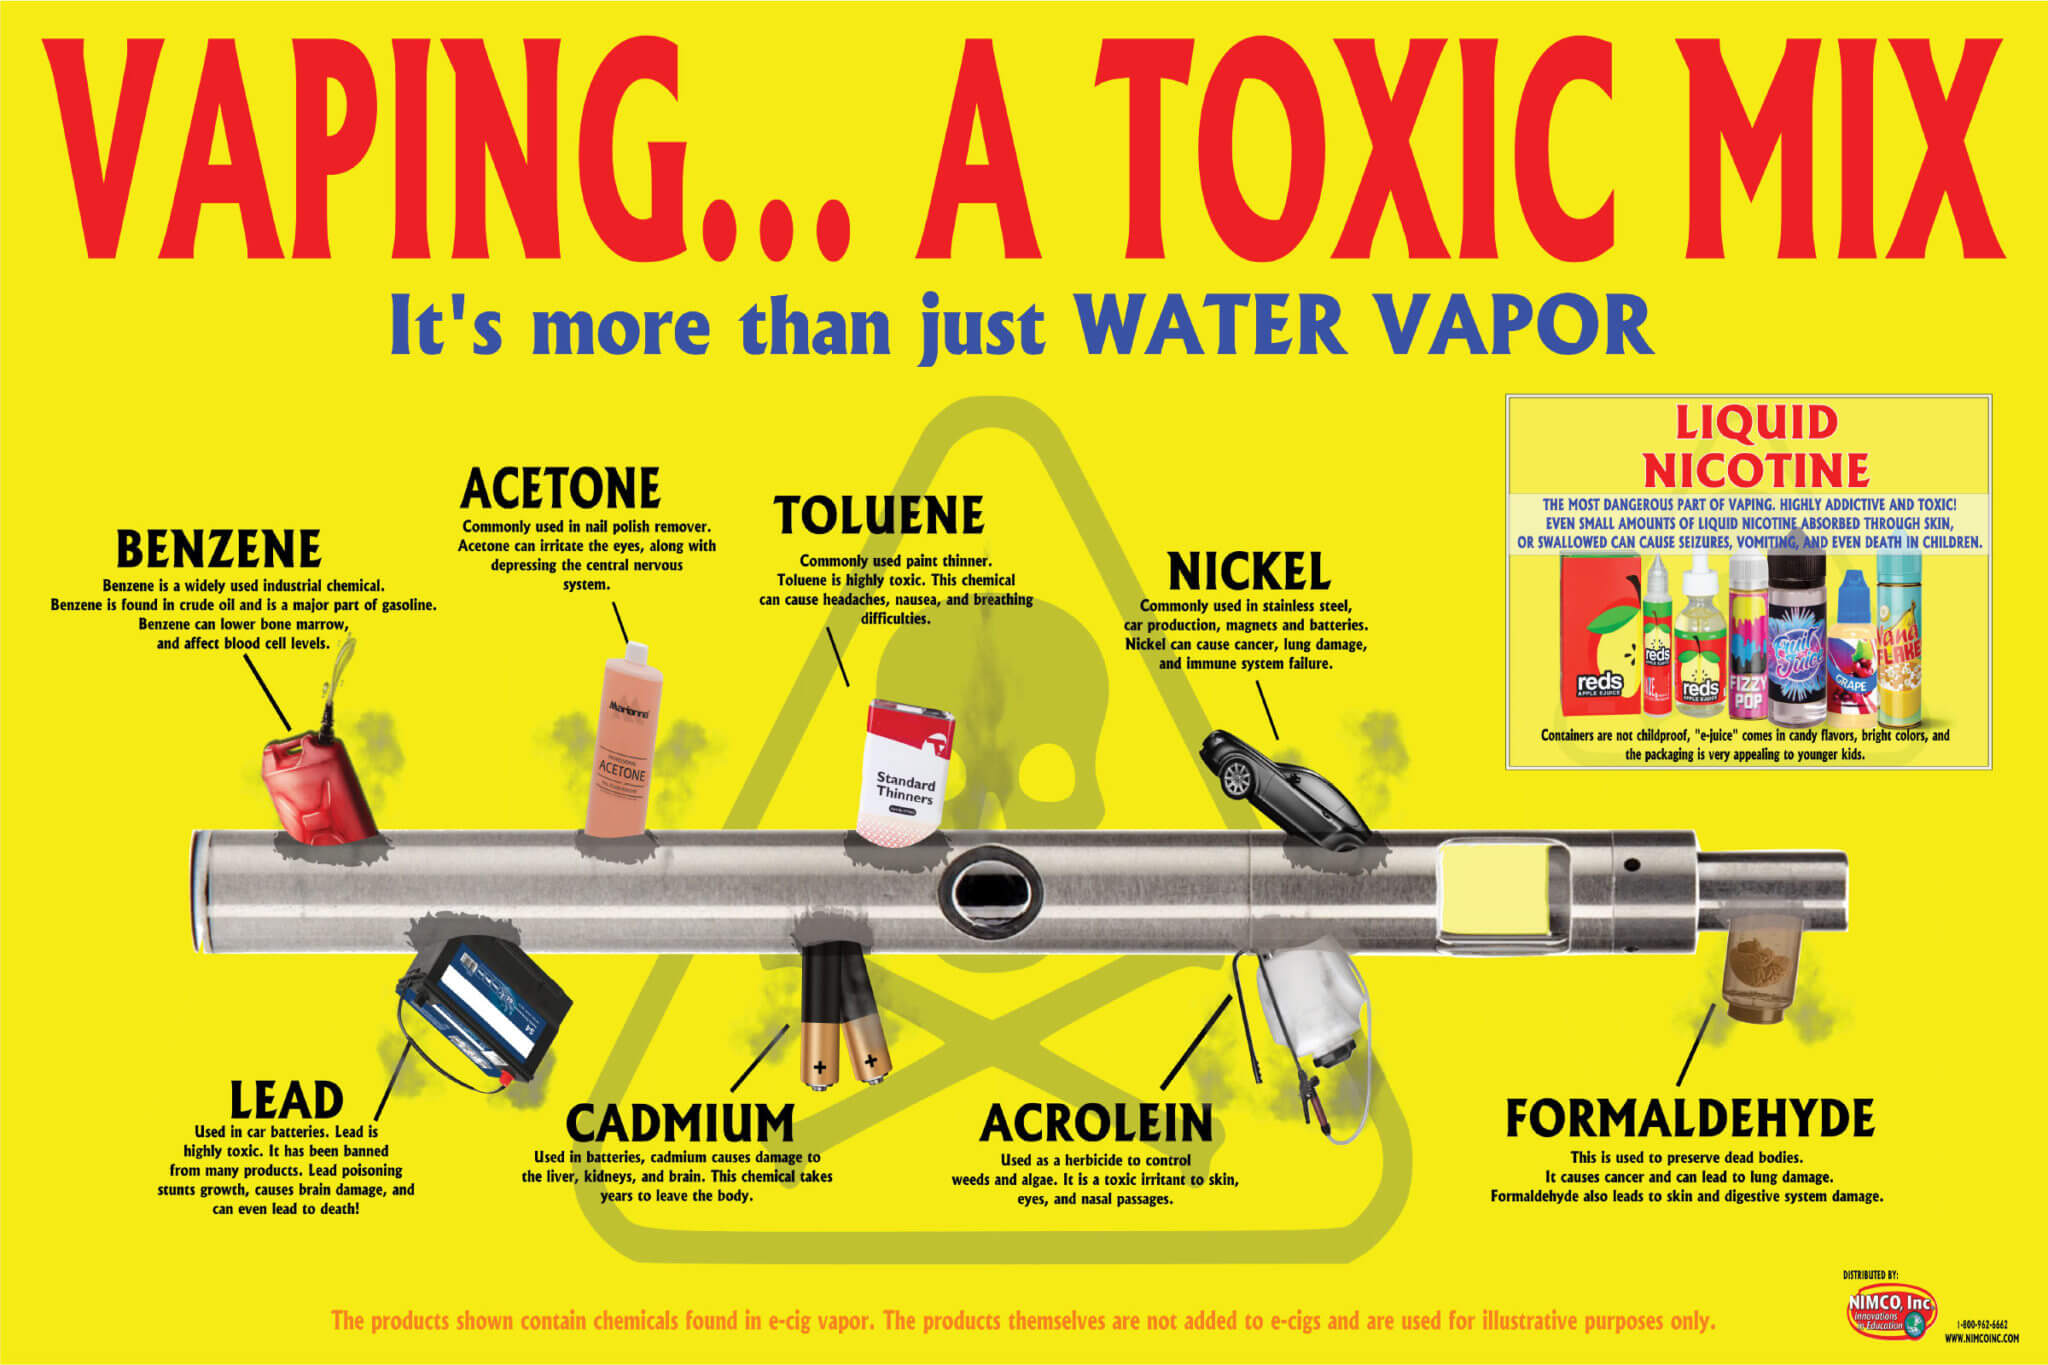 dangers-of-vaping-poster-a-toxic-mix-nimco-inc-prevention